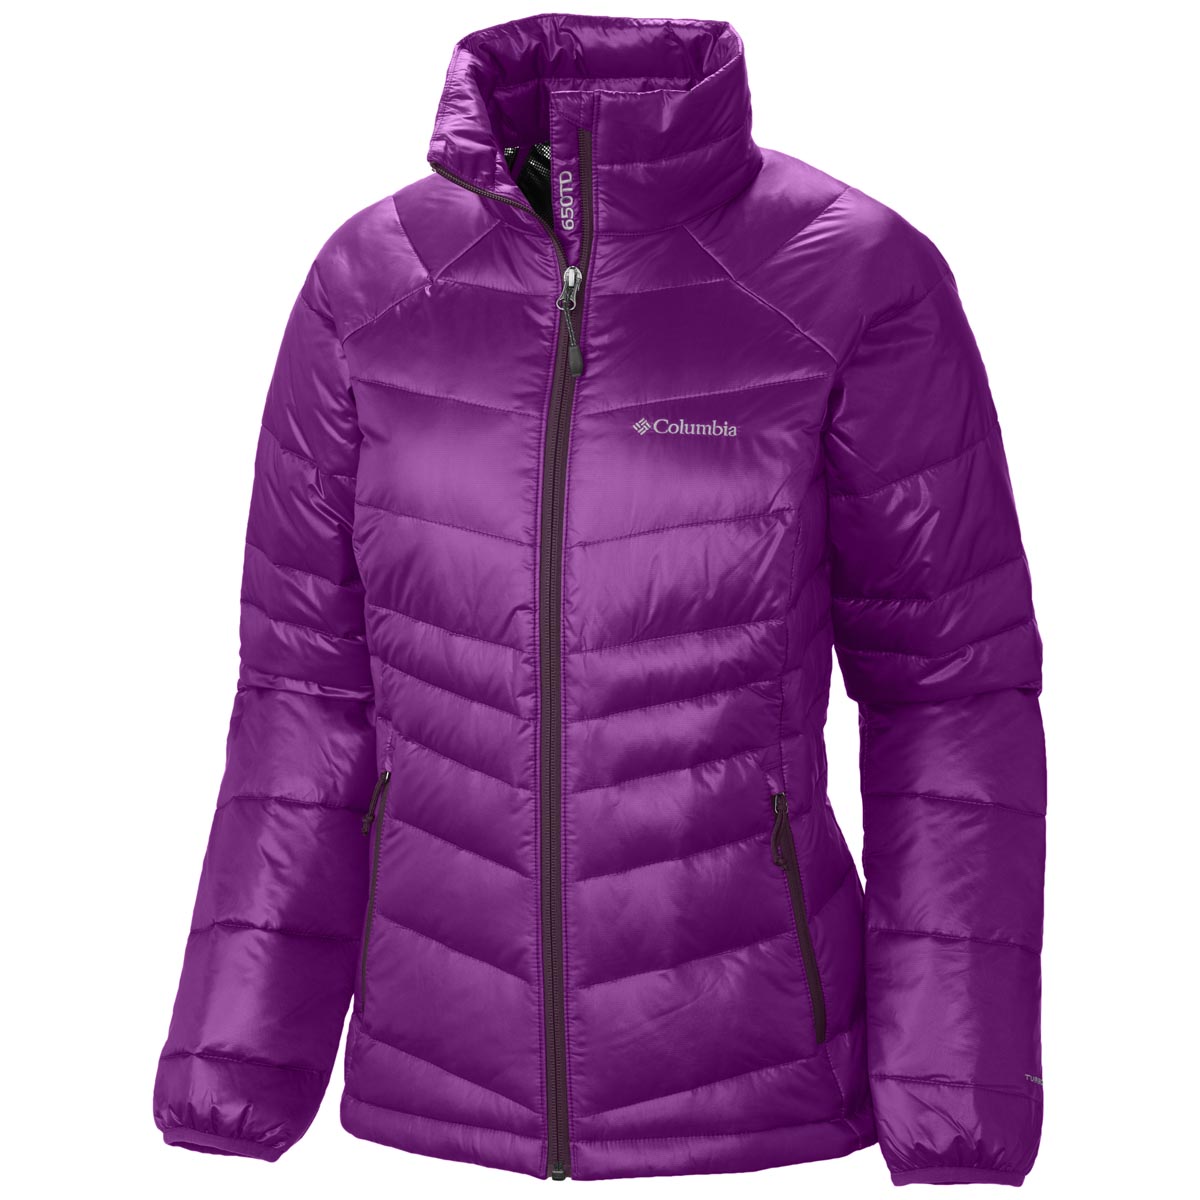 Columbia Women's Gold 650 TurboDown Radial Jacket Discontinued Pricing